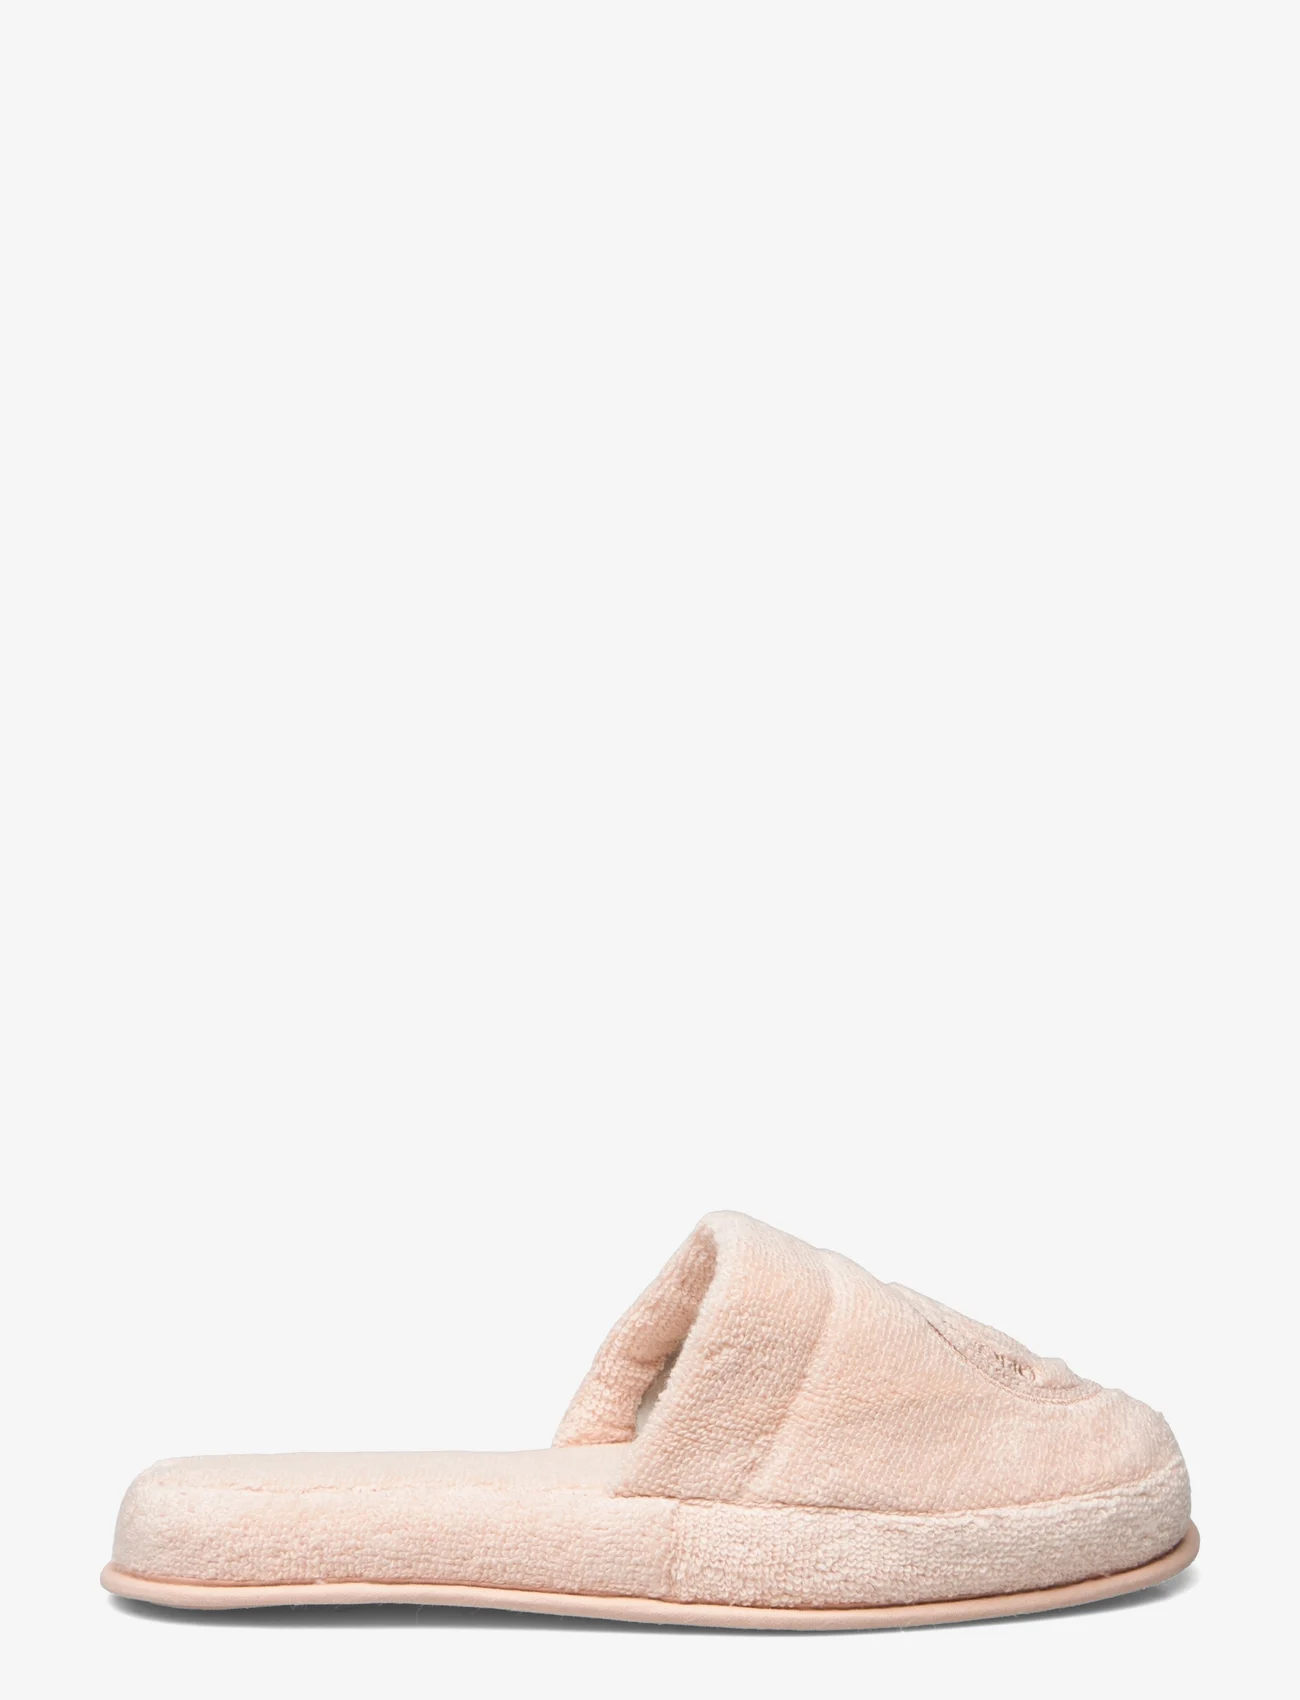 GANT - CREST SLIPPERS - apricot shade - 1